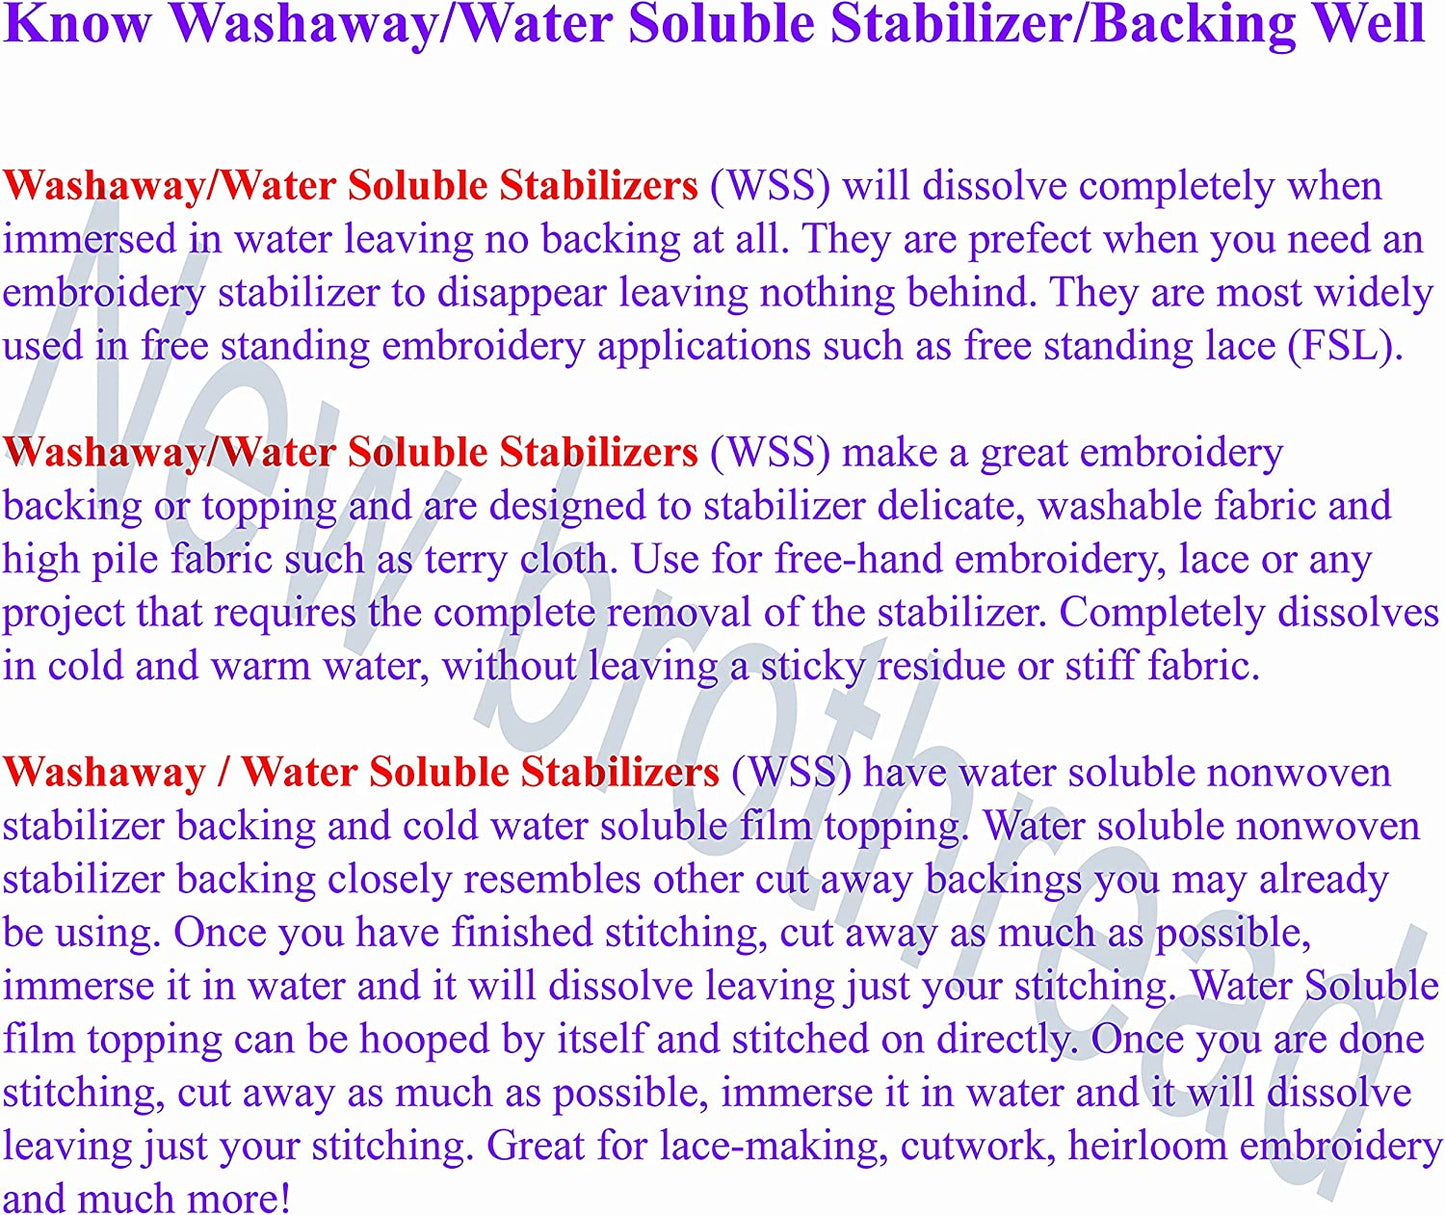 New brothread Wash Away - Water Soluble Machine Embroidery Stabilizer Backing & Topping